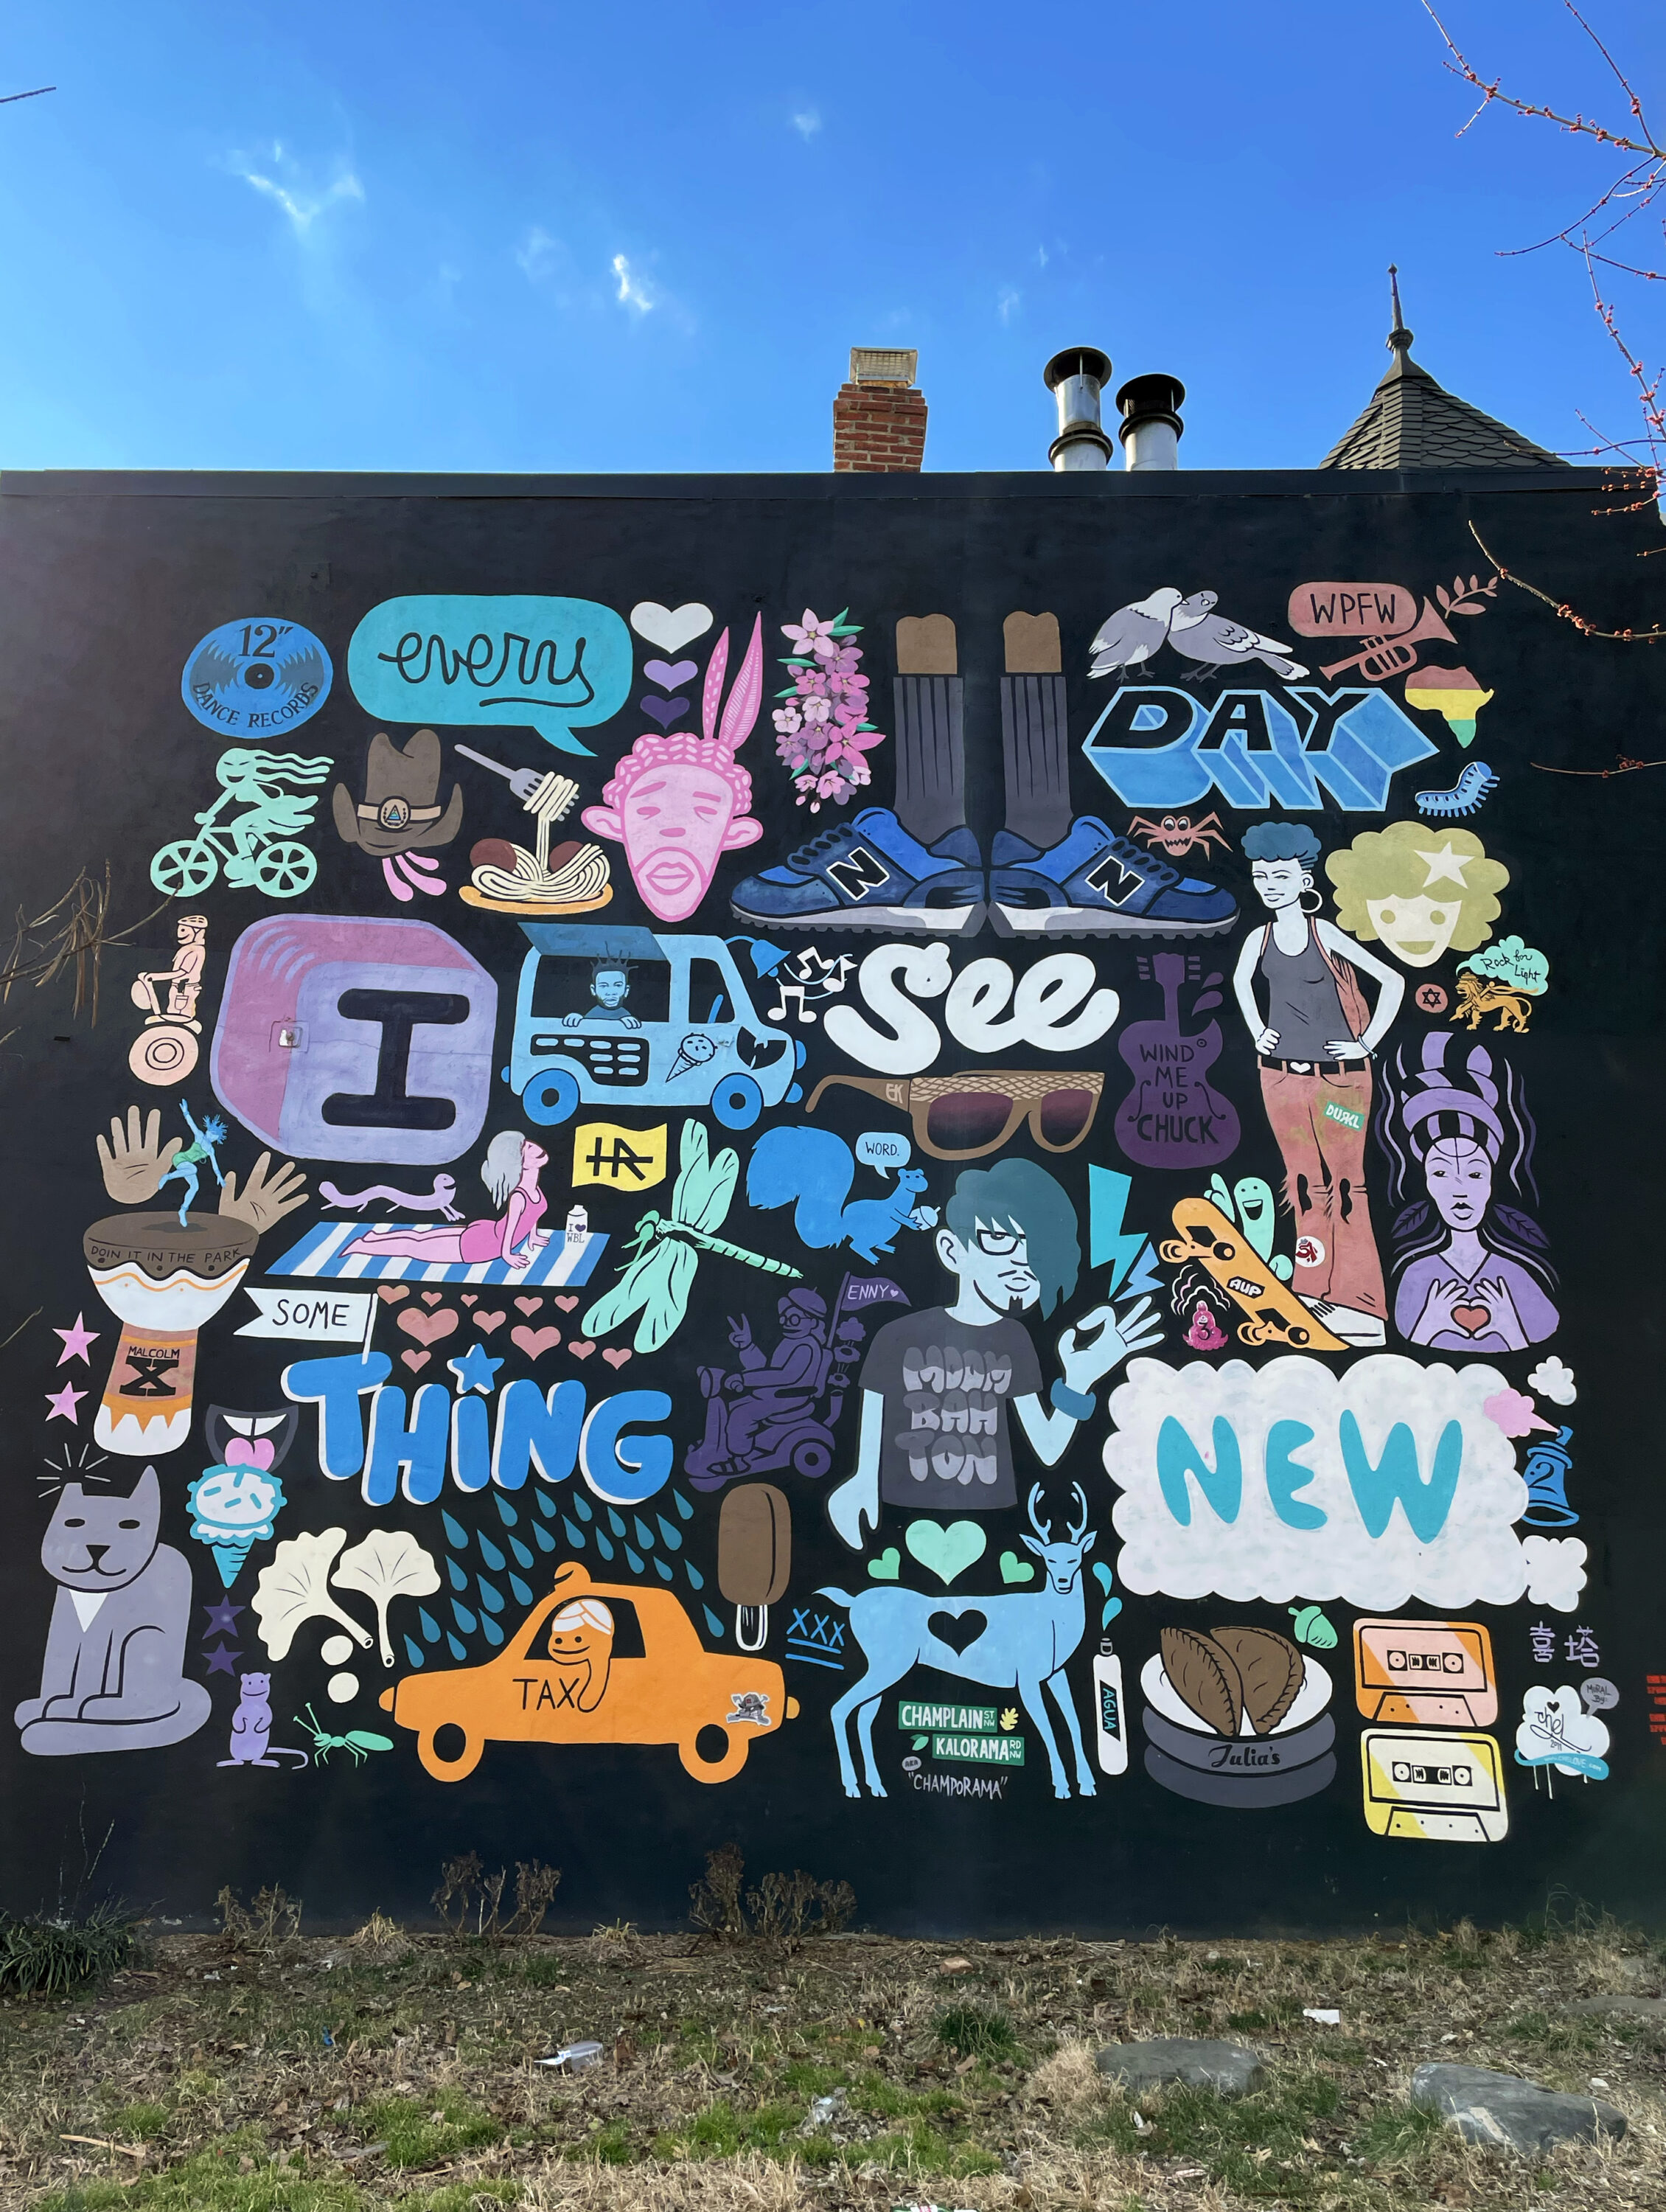 Colorful icons of people, animals, and objects set against a black background. The words “every day I see something new” are painted in brightly colored graphic text spread throughout the mural.